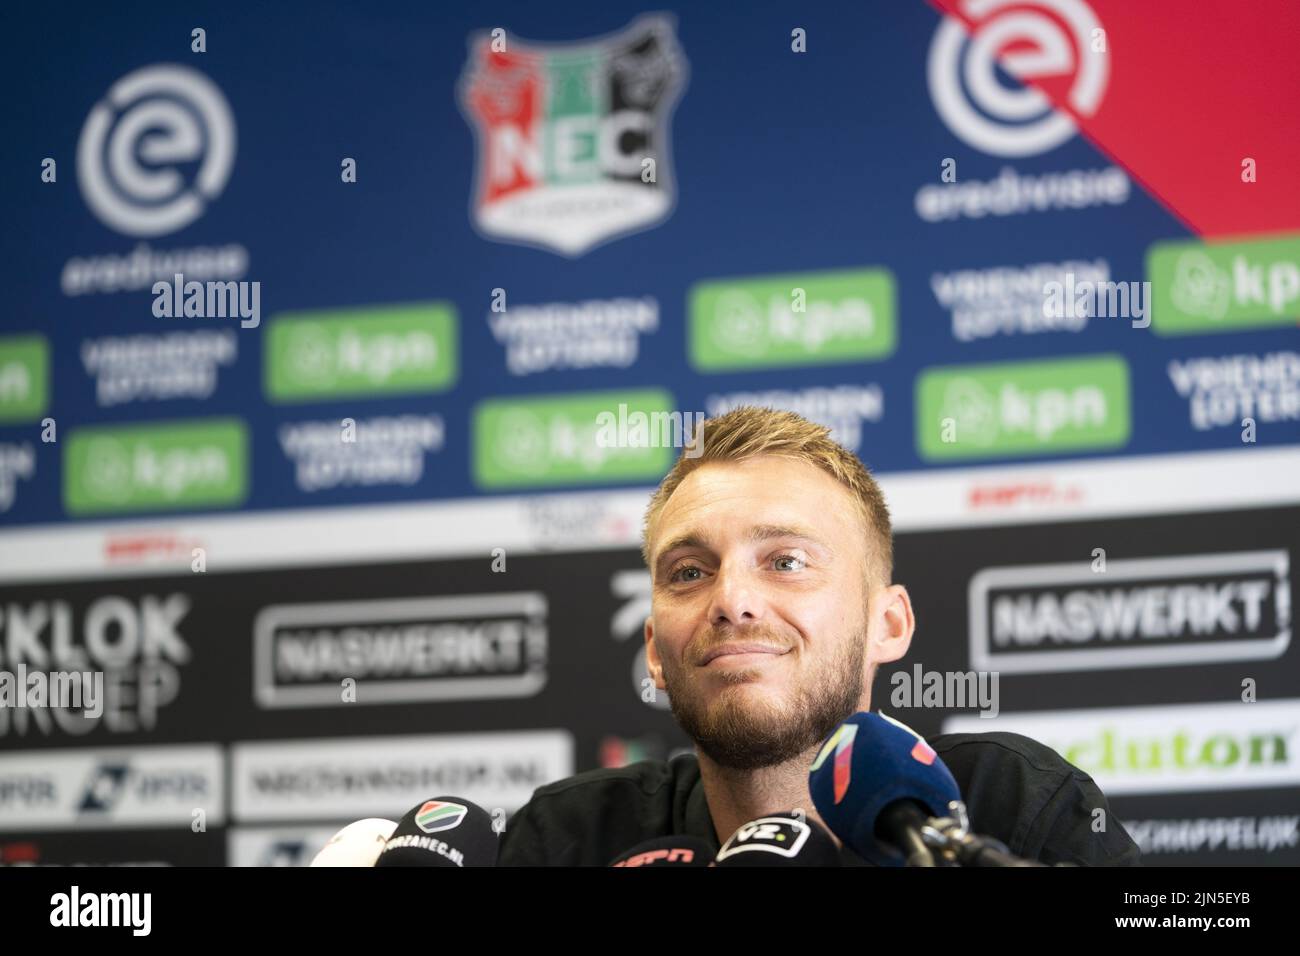 2022-08-09 10:59:33 NIJMEGEN - Jasper Cillessen during his presentation at NEC. The 33-year-old goalkeeper has committed himself to the club from Nijmegen for three years. He left the Gelderland formation in 2011 for Ajax and later also played for FC Barcelona and Valencia. ANP JEROEN JUMELET netherlands out - belgium out Stock Photo